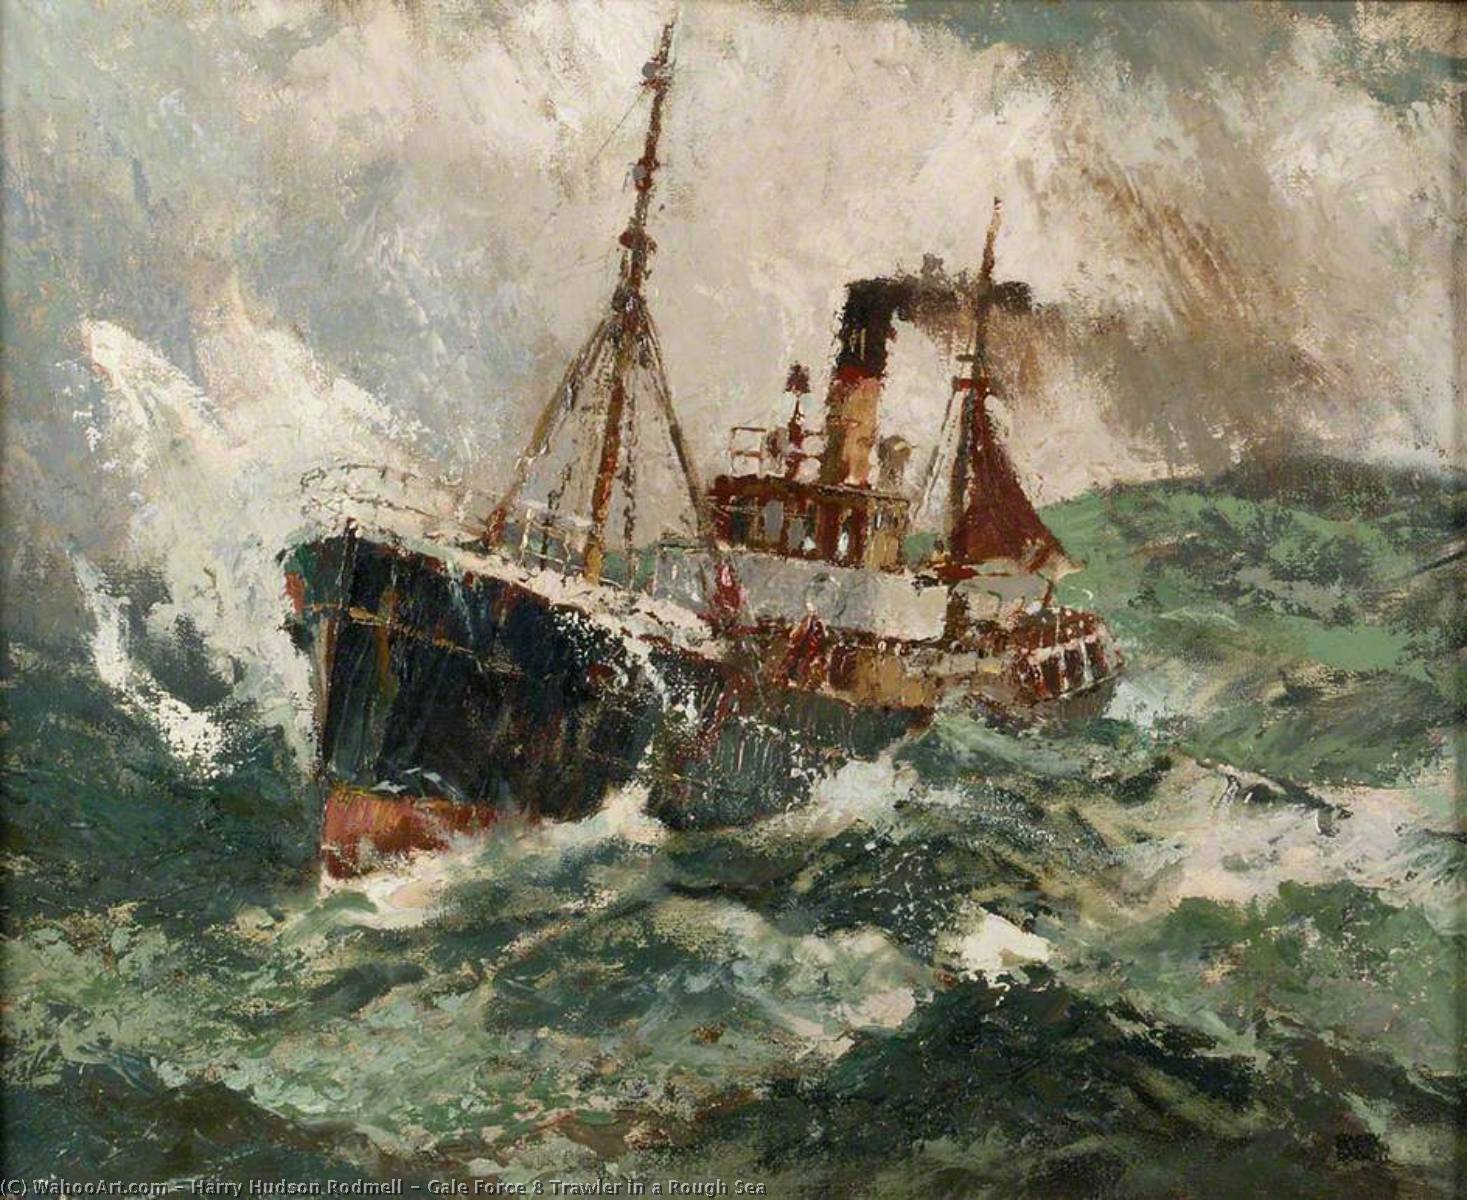 Gale Force 8 Trawler in a Rough Sea by Harry Hudson Rodmell (1896-1984) Harry Hudson Rodmell | ArtsDot.com